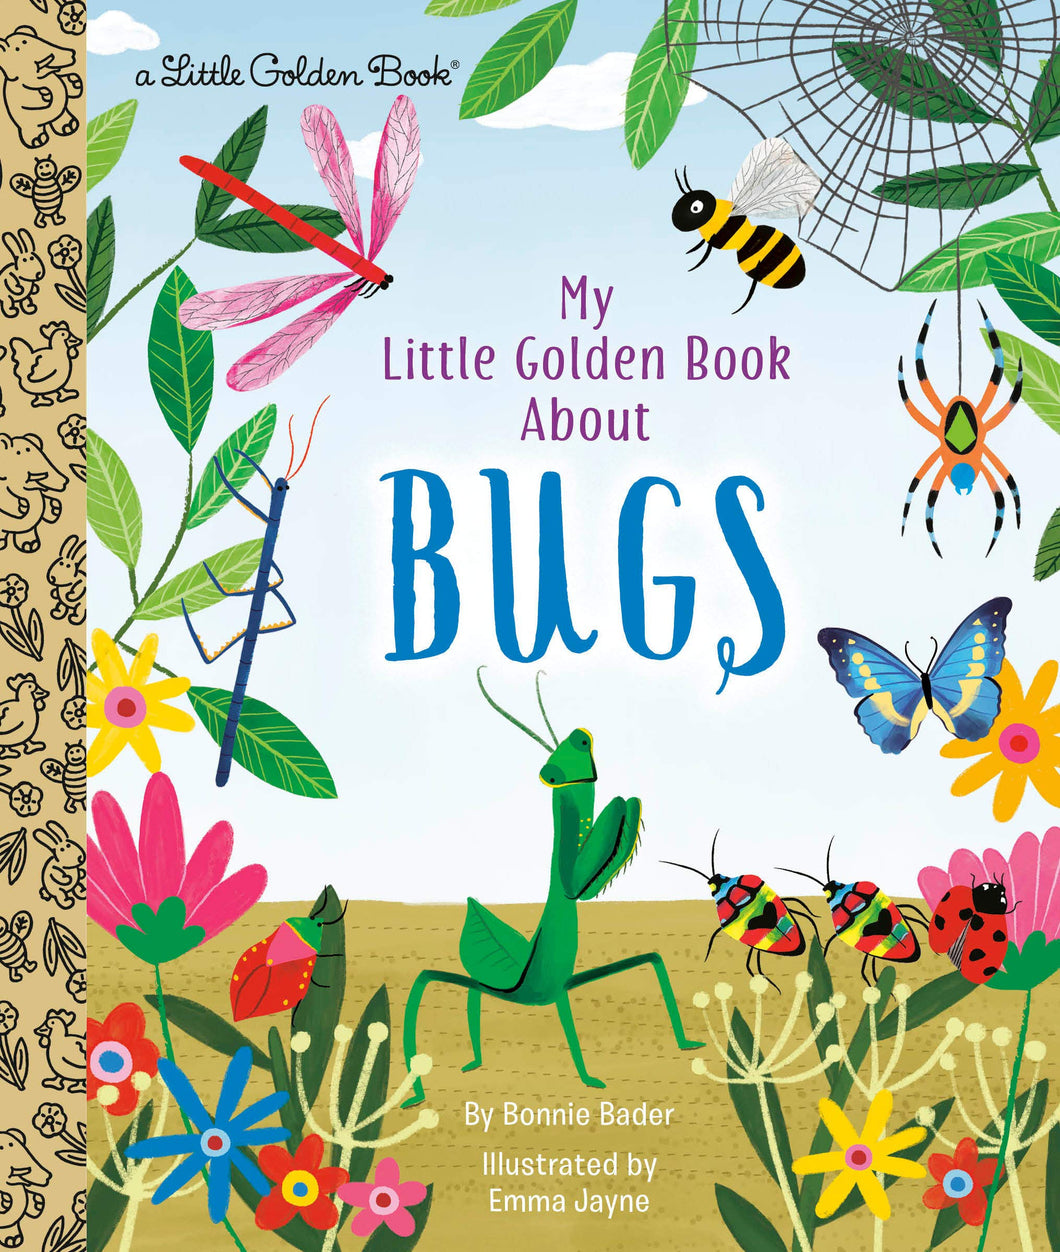 My Little Golden Book About Bugs [Bonnie Bader]